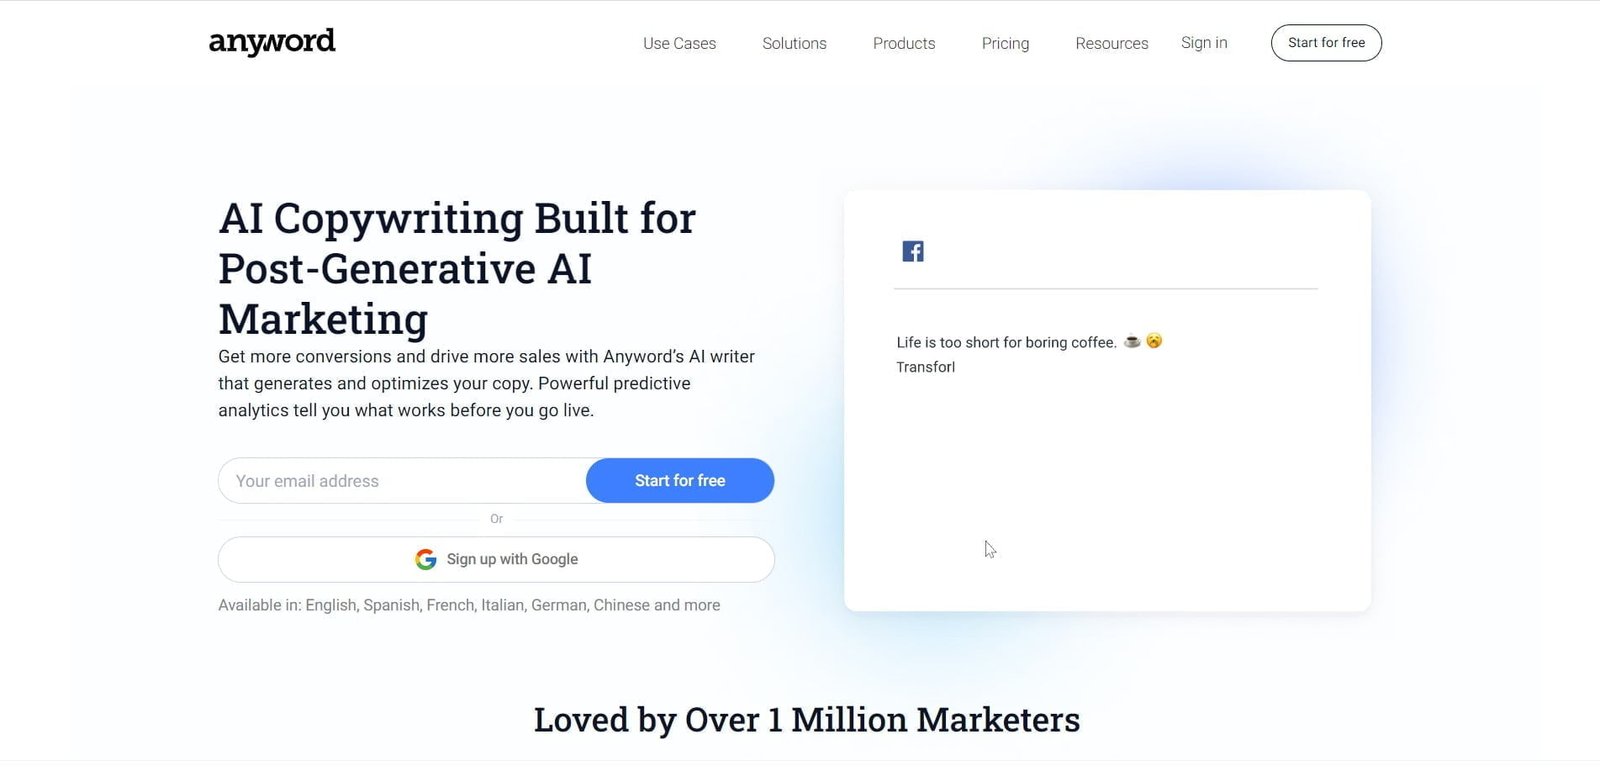 Anyword is an AI copywriting tool designed to help users create high-quality content